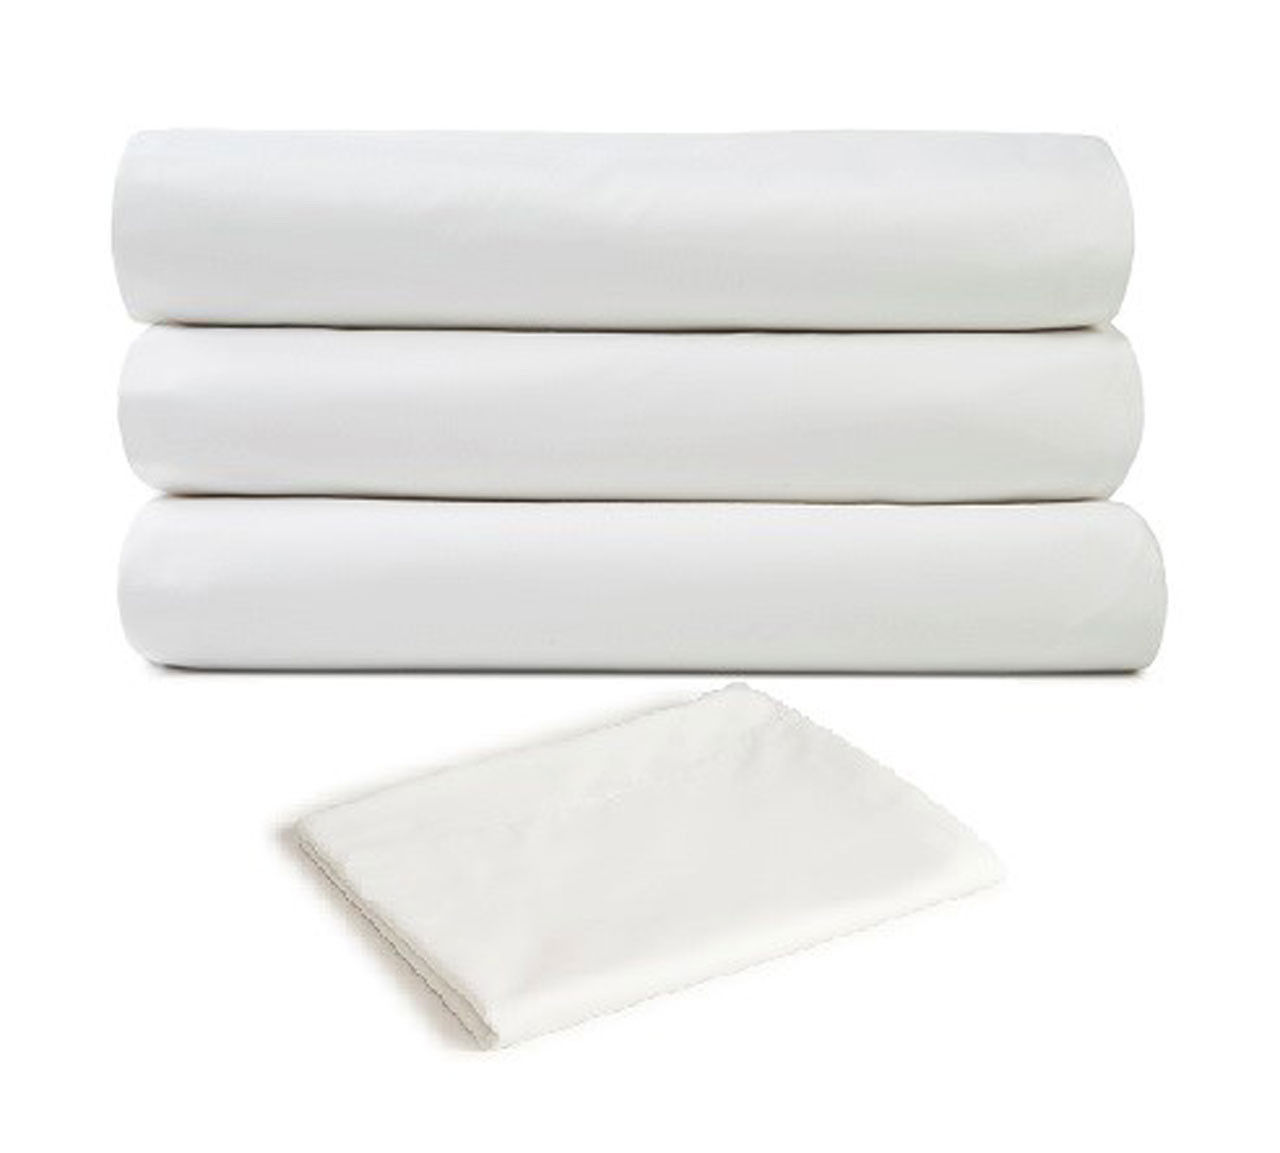 Do 100 polyester bed sheets resist wear and tear?